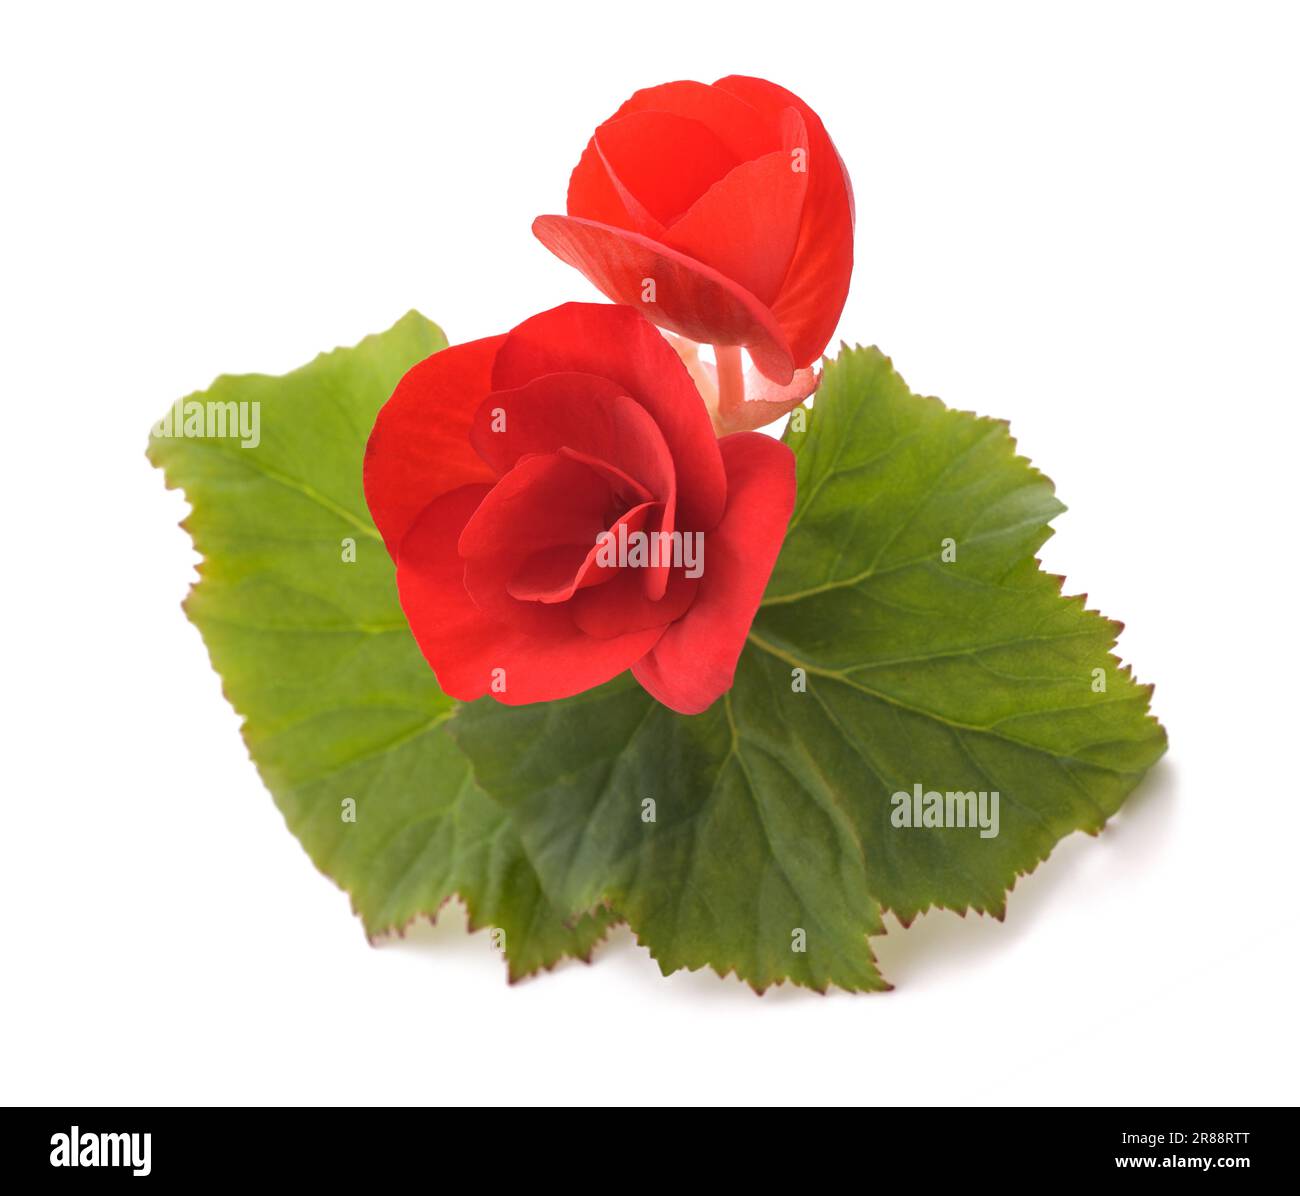 Red Begonia flowers isolated on white background Stock Photo